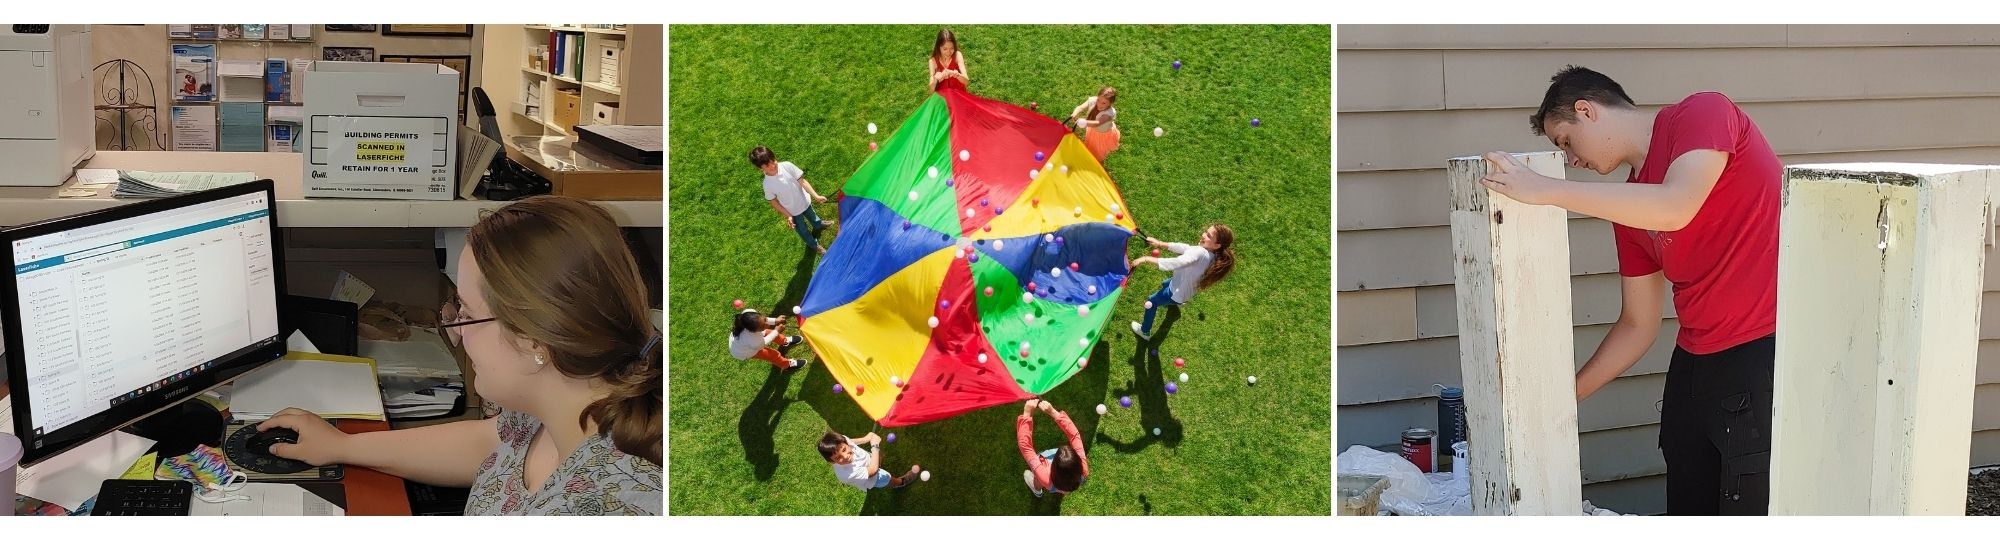 A three panel collage. Photo 1 shows a young women with brown hair and glasses working on a computer. Photo 2 is an aerial shot looking down at a group of 7 kids playing with a rainbow colored parachute. Photo 3 is of a young man in a red shirt outside painting wooden boxes white.  